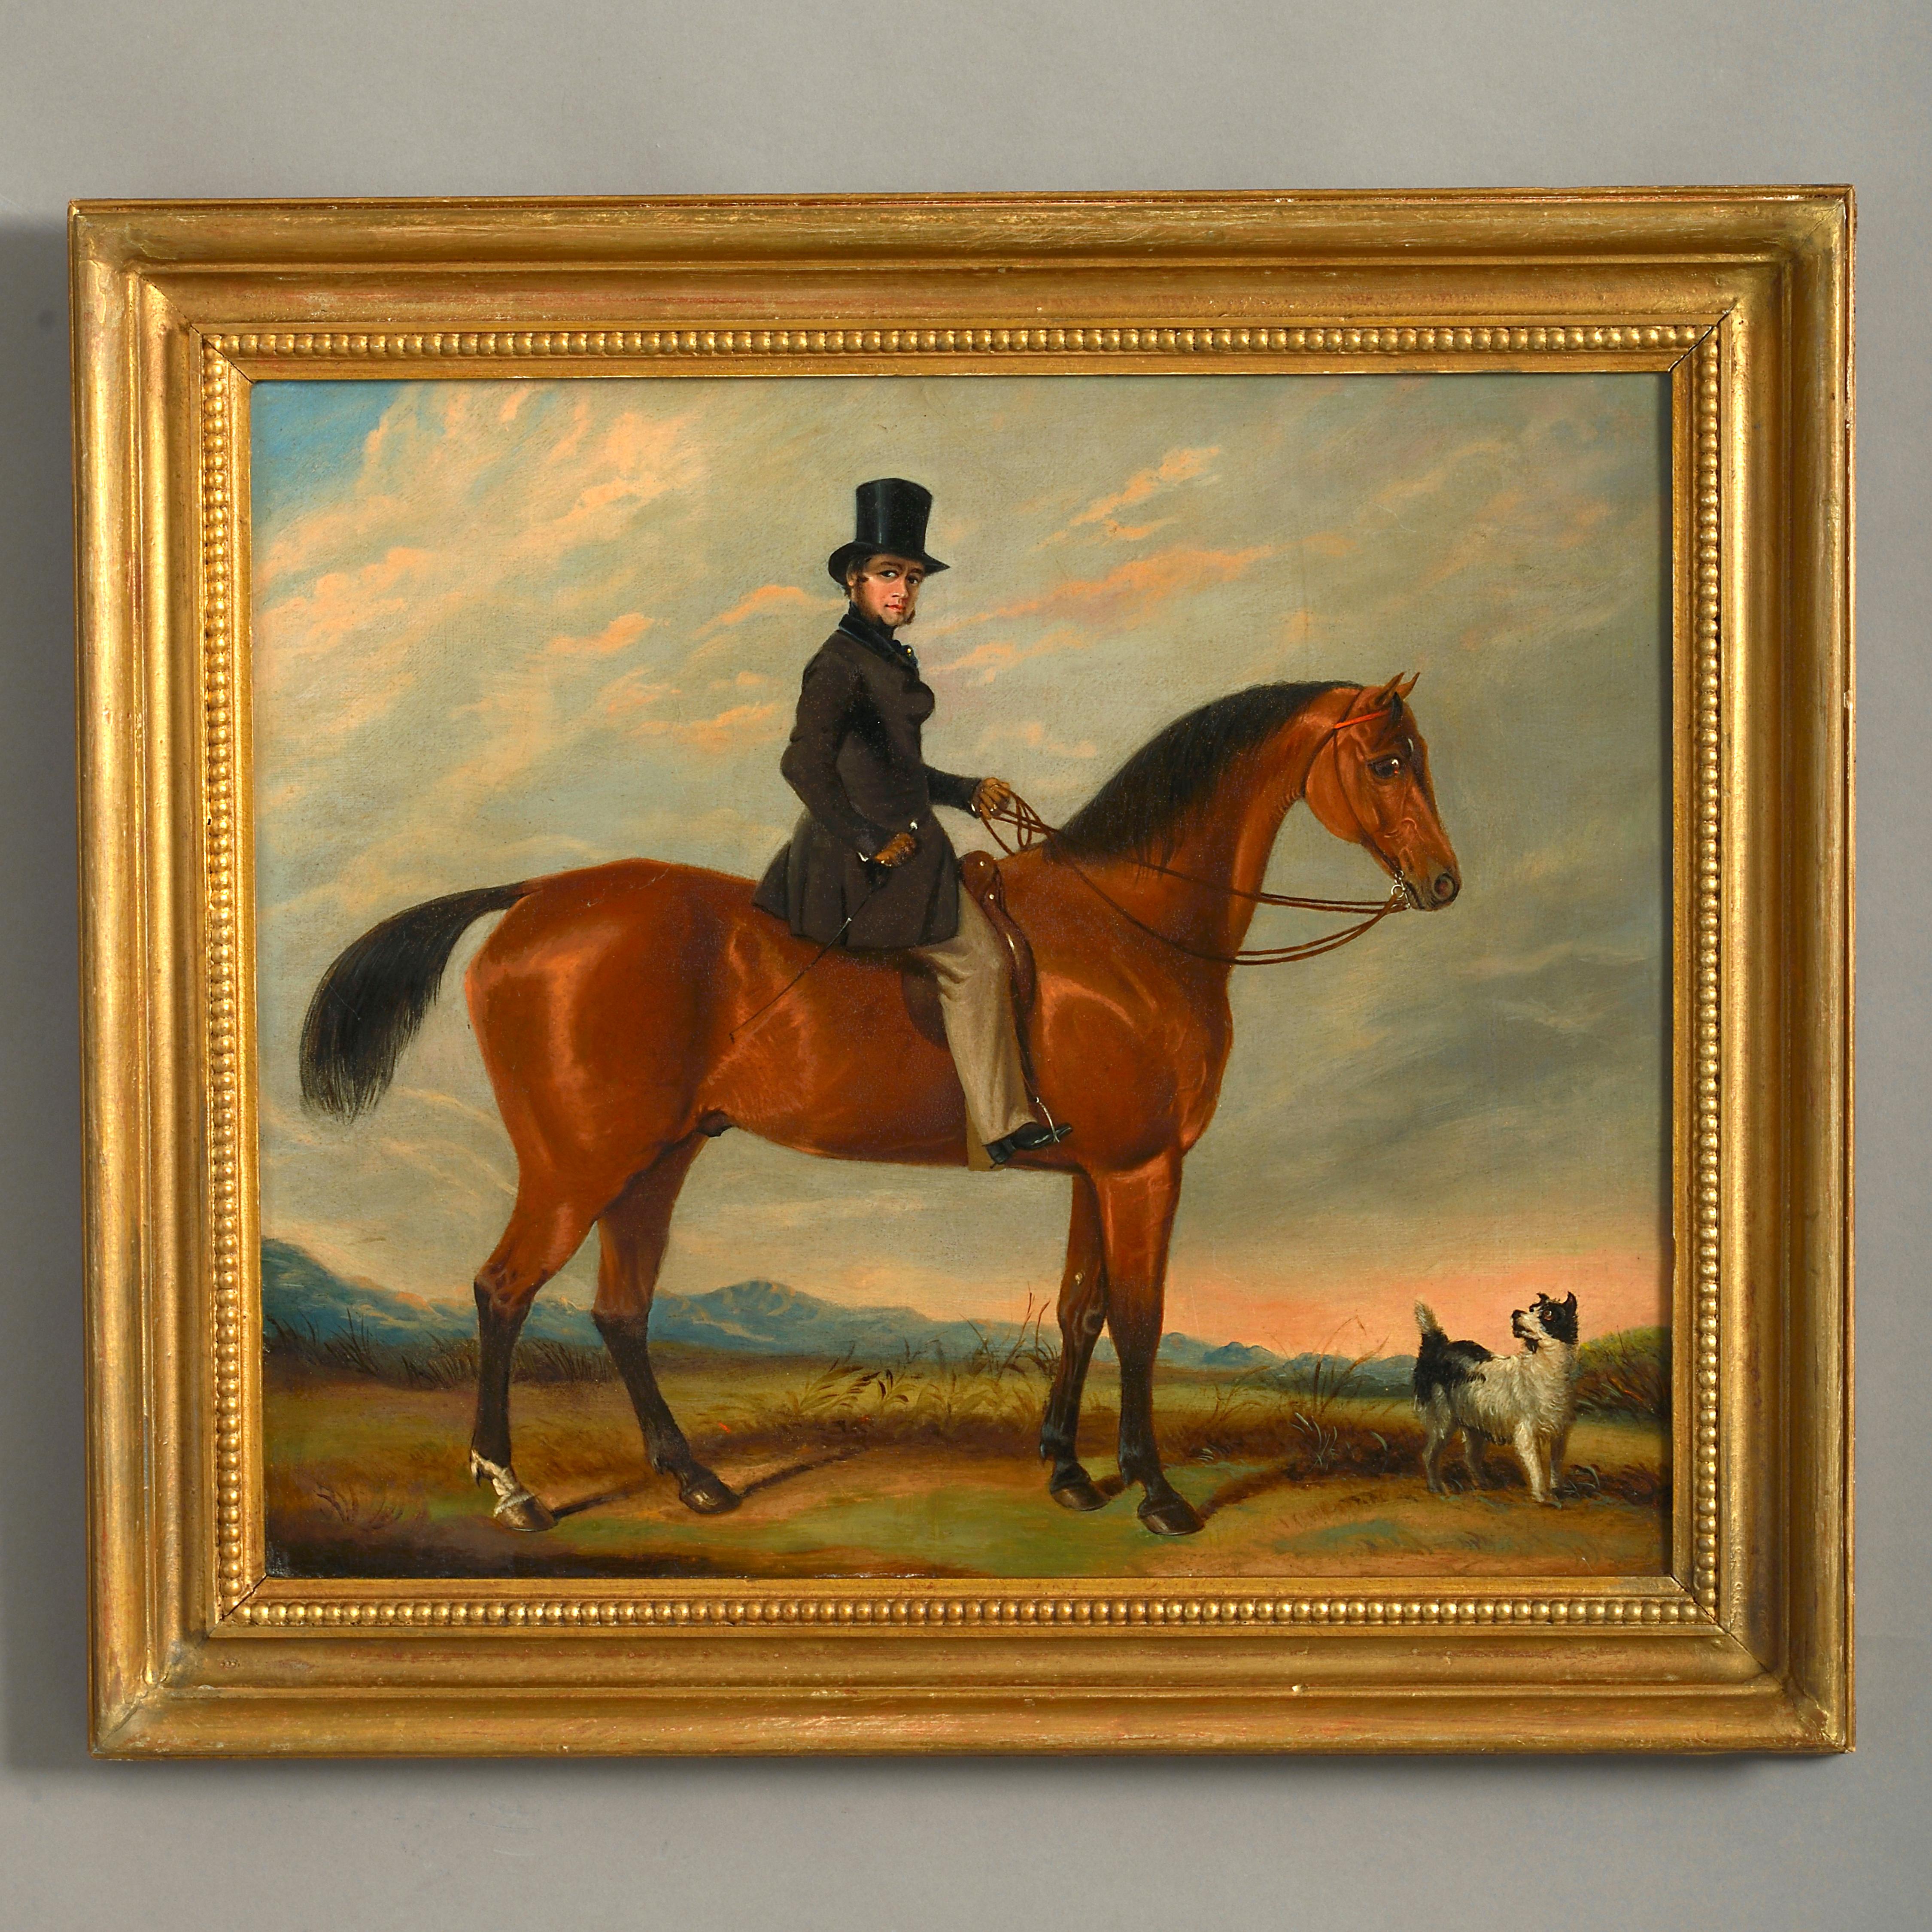 Unknown Portrait Painting - A Portrait of The Earl Craven, Mounted on a Horse